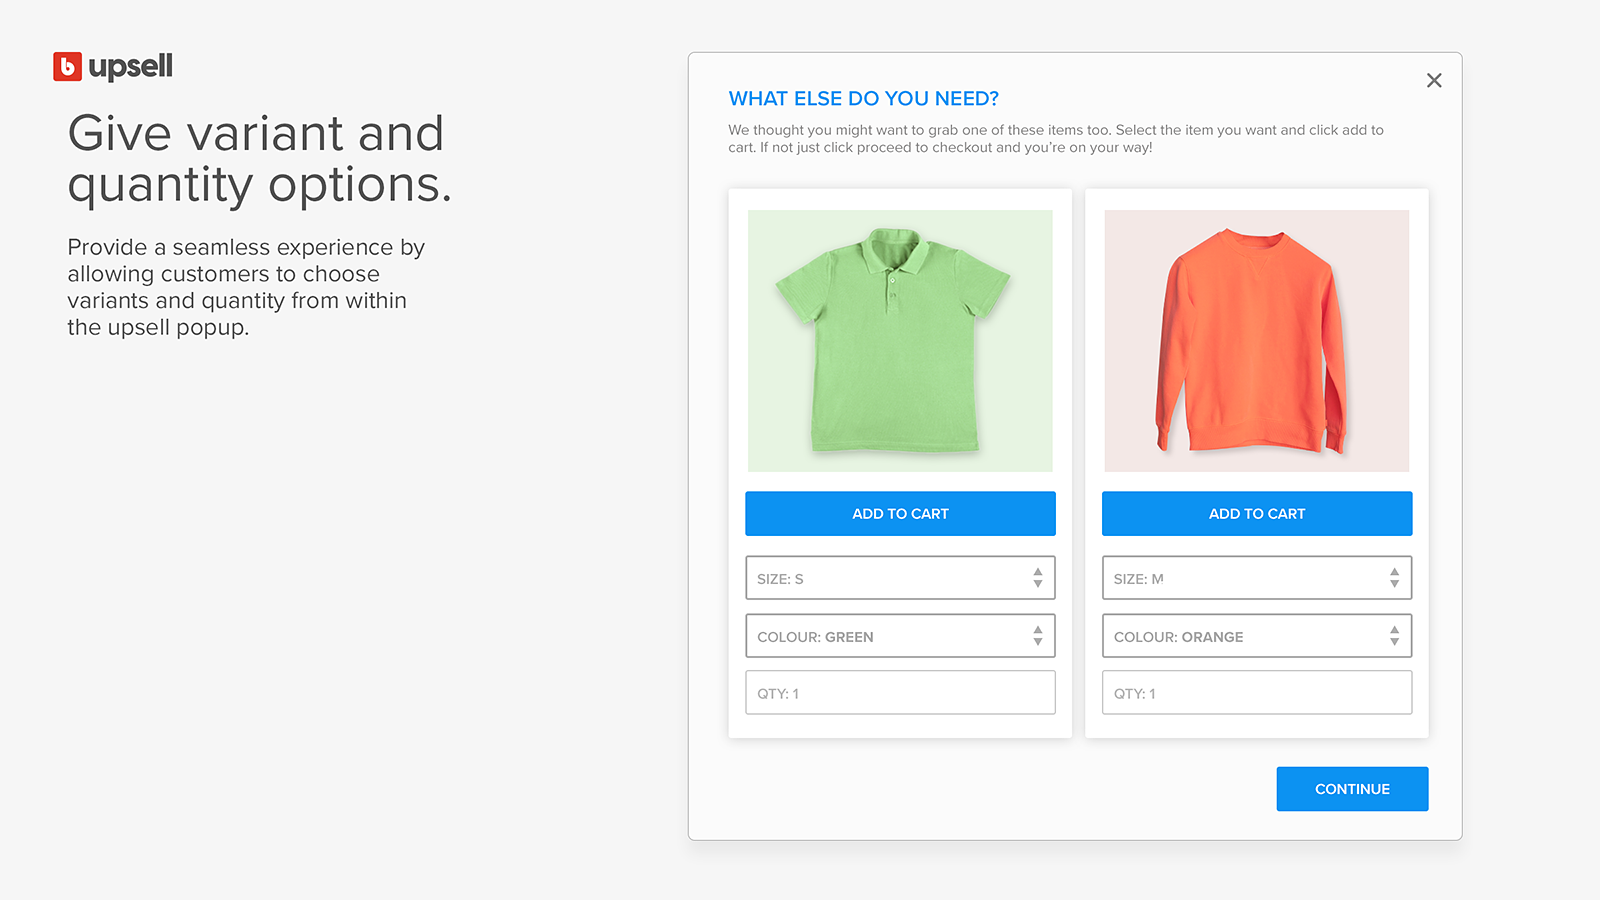 Display variant and quantity options in the offer modal